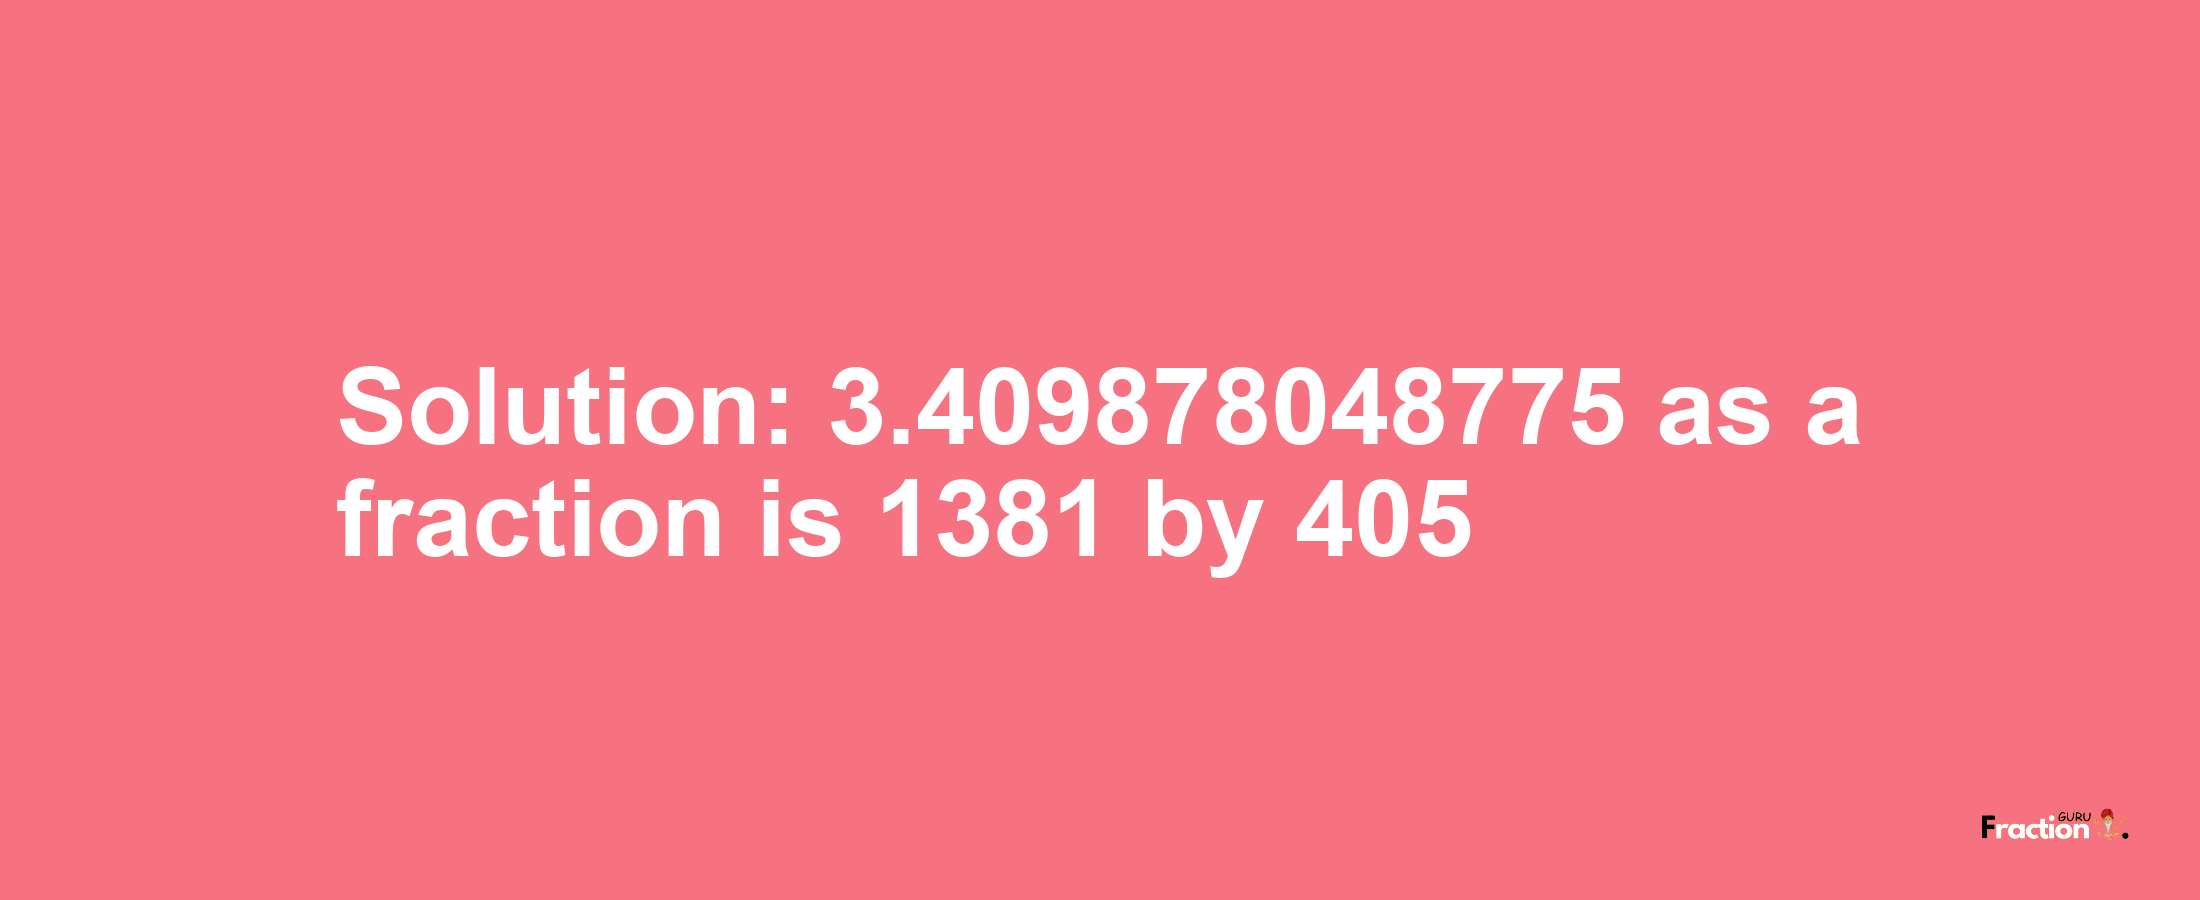 Solution:3.409878048775 as a fraction is 1381/405